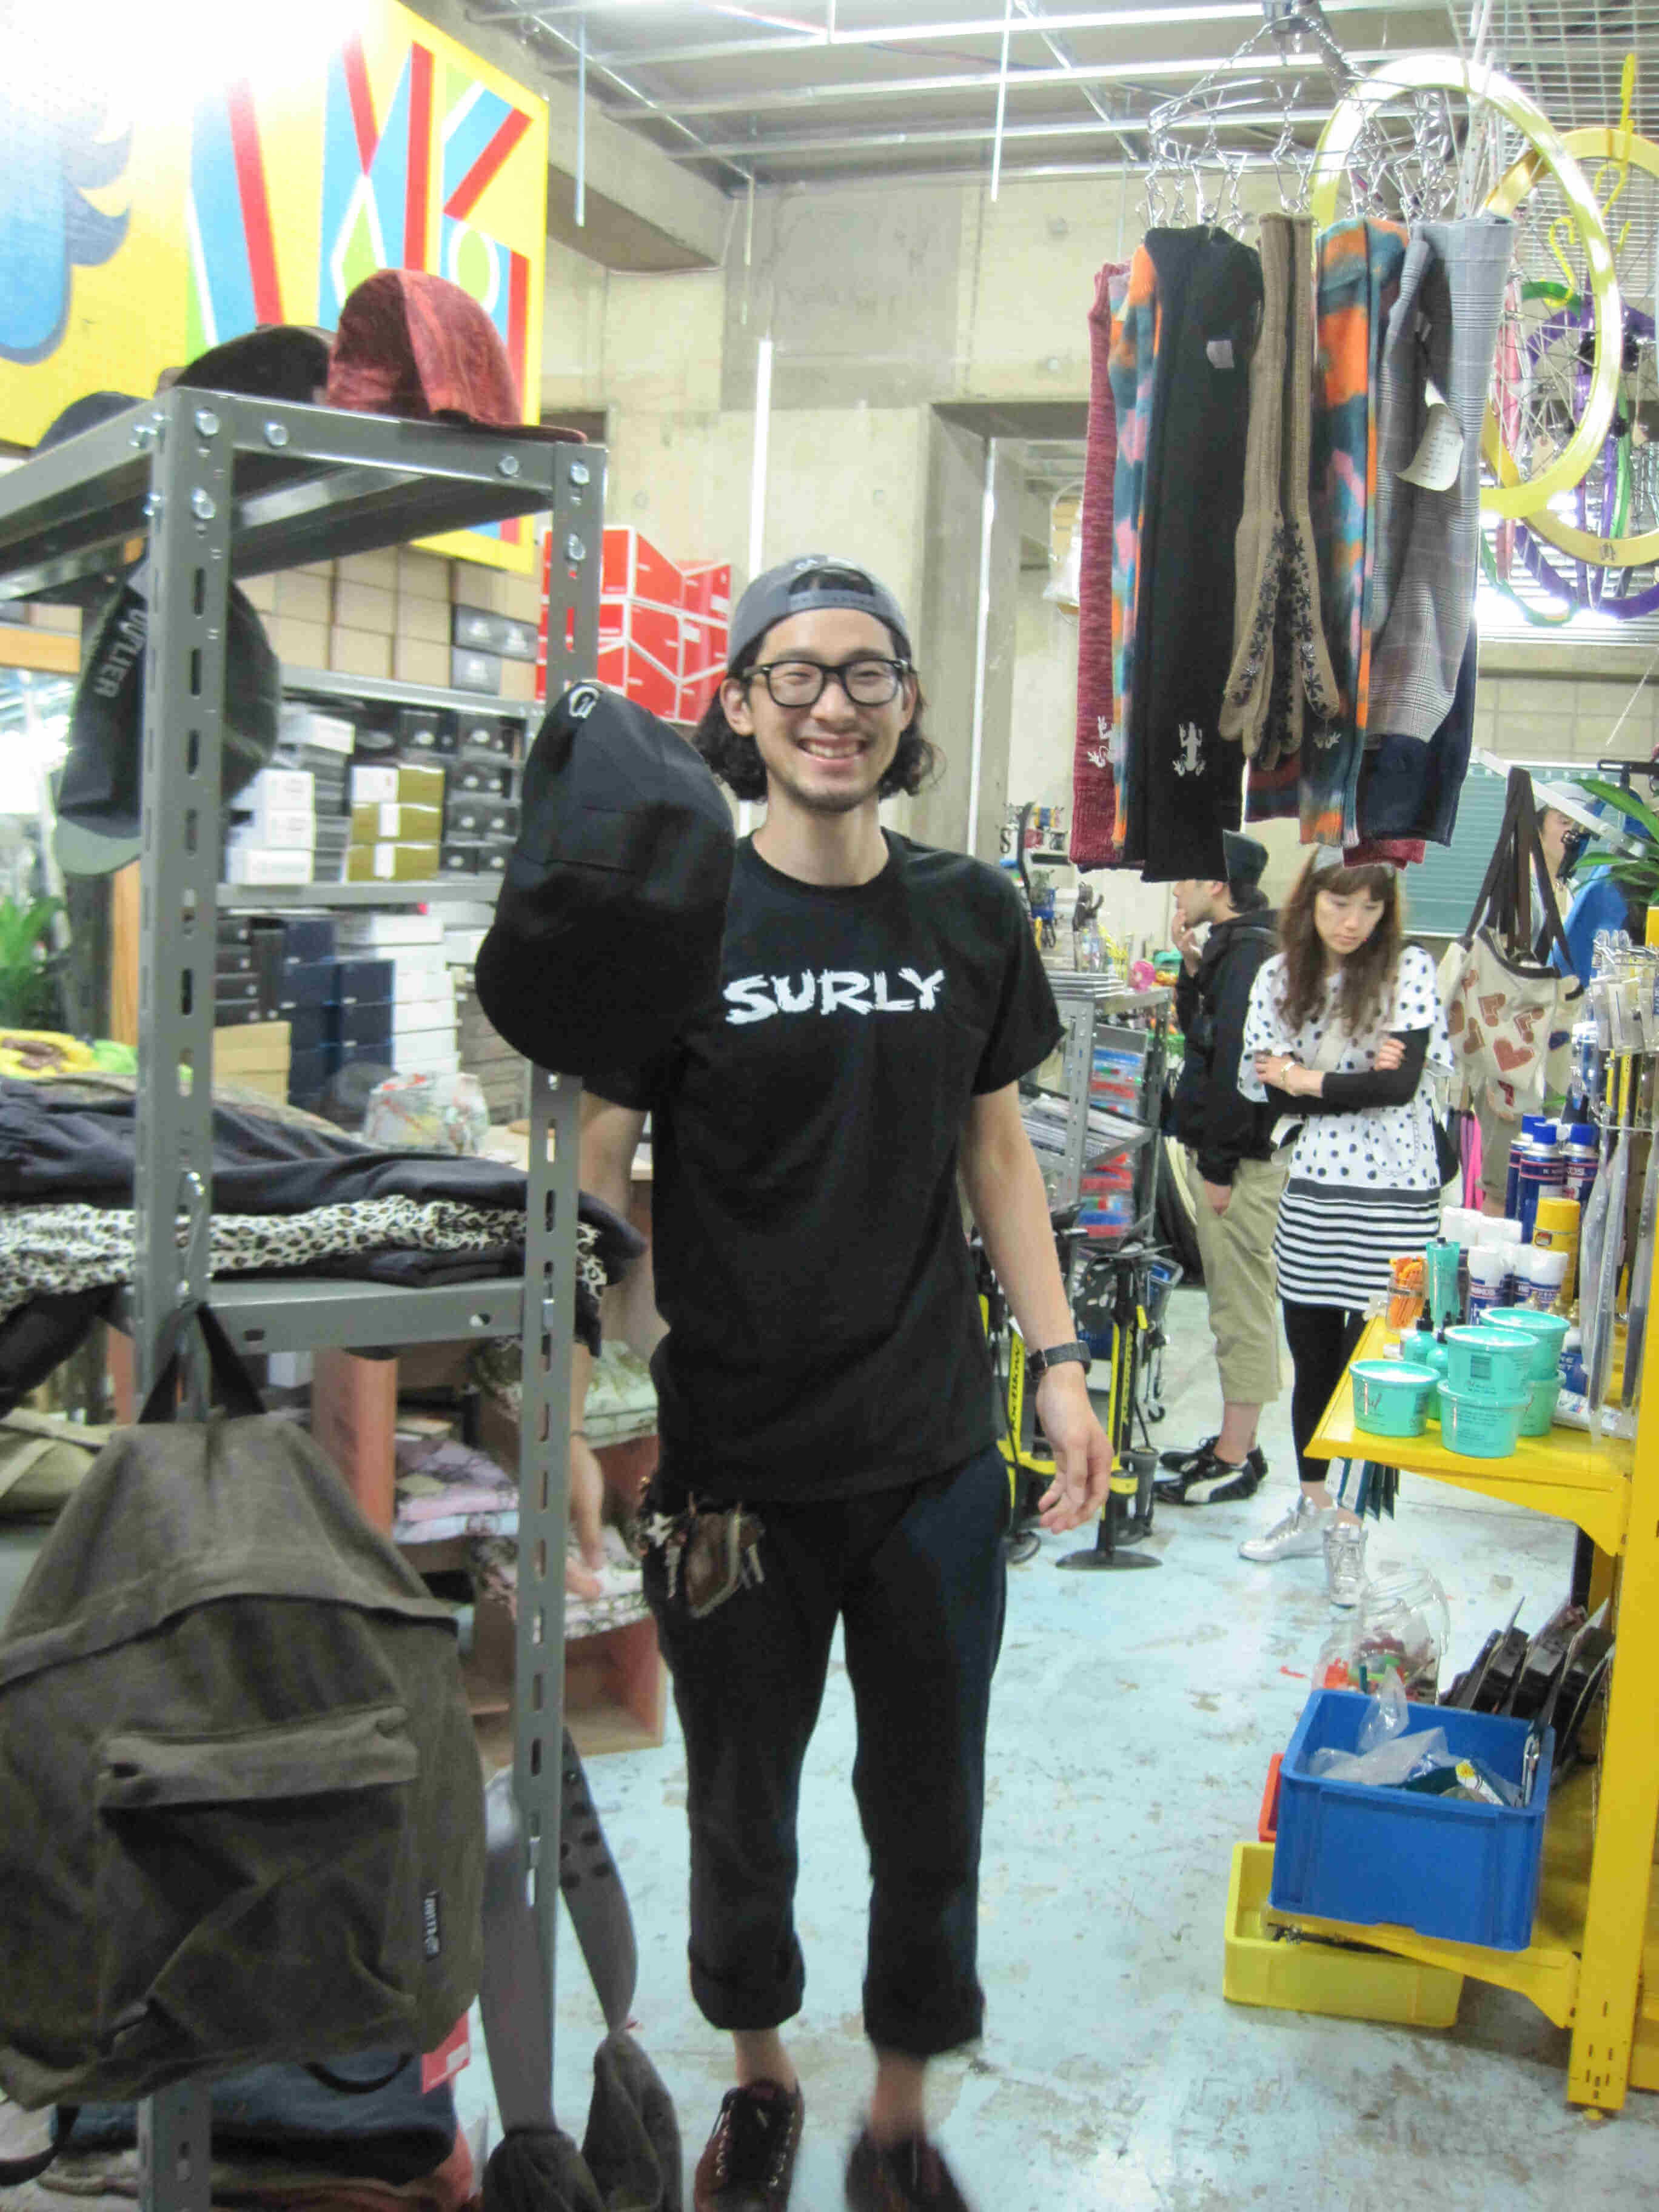 Front view of a person, wearing a black Surly Bikes t-shirt, standing in a bike shop, next to a rack with clothes on it